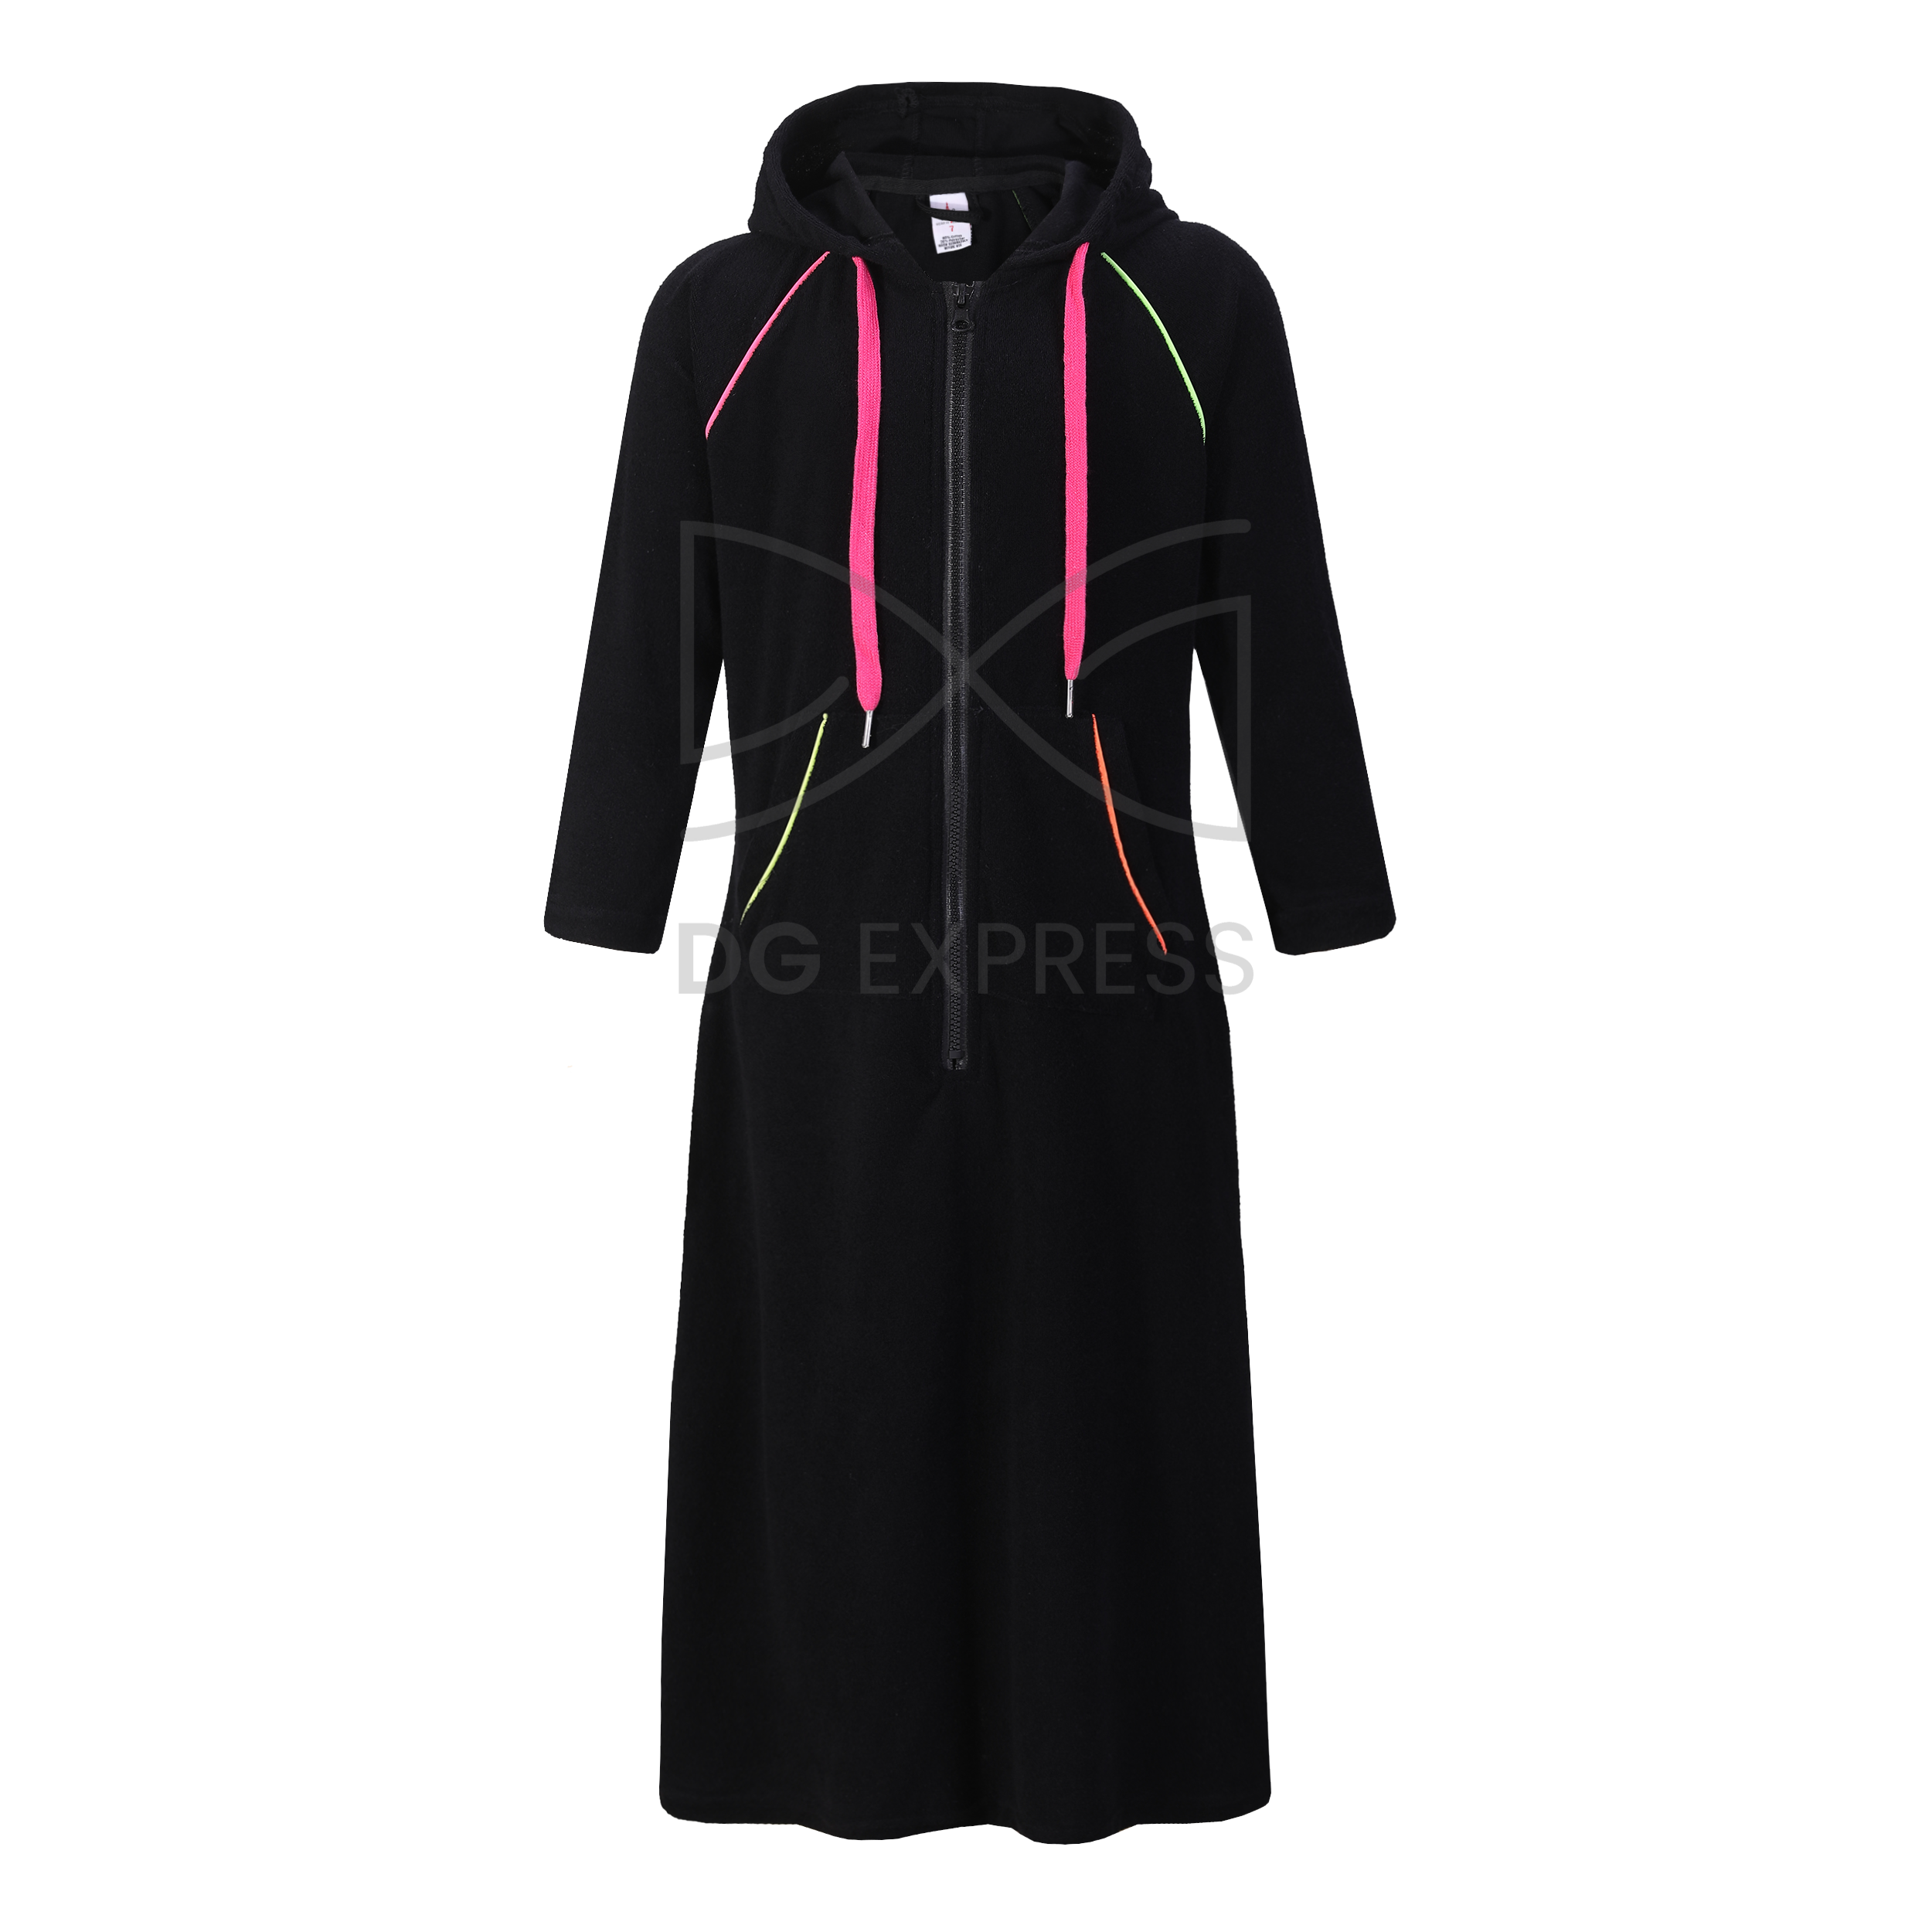 Abstract Girl's Black With Neon Trim Terry Robe